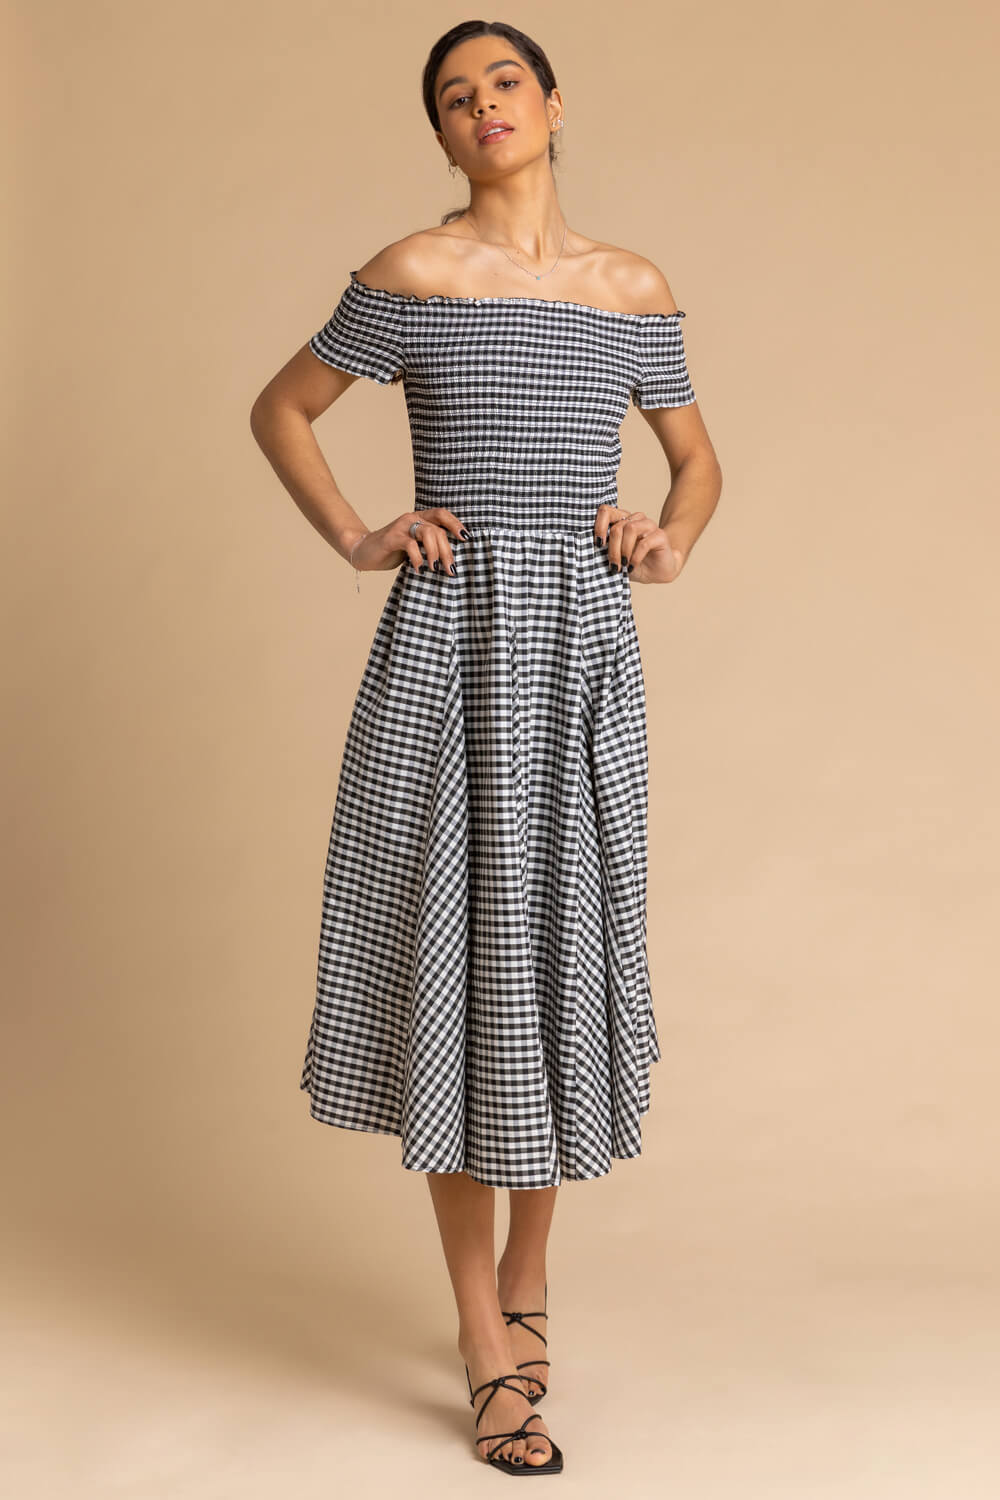 Black Gingham Bardot Fit and Flare Dress, Image 3 of 5